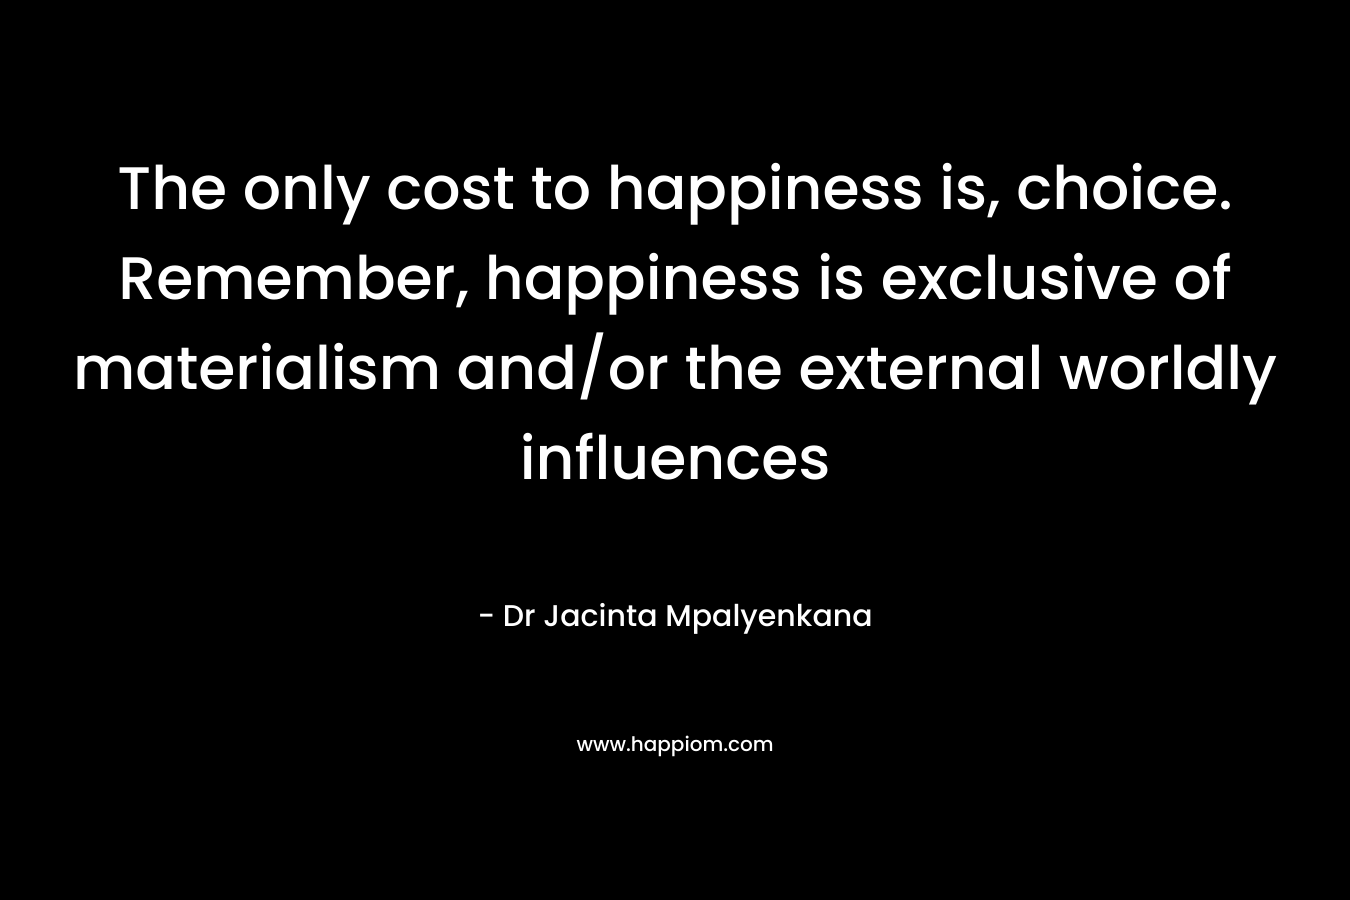 The only cost to happiness is, choice. Remember, happiness is exclusive of materialism and/or the external worldly influences – Dr Jacinta Mpalyenkana